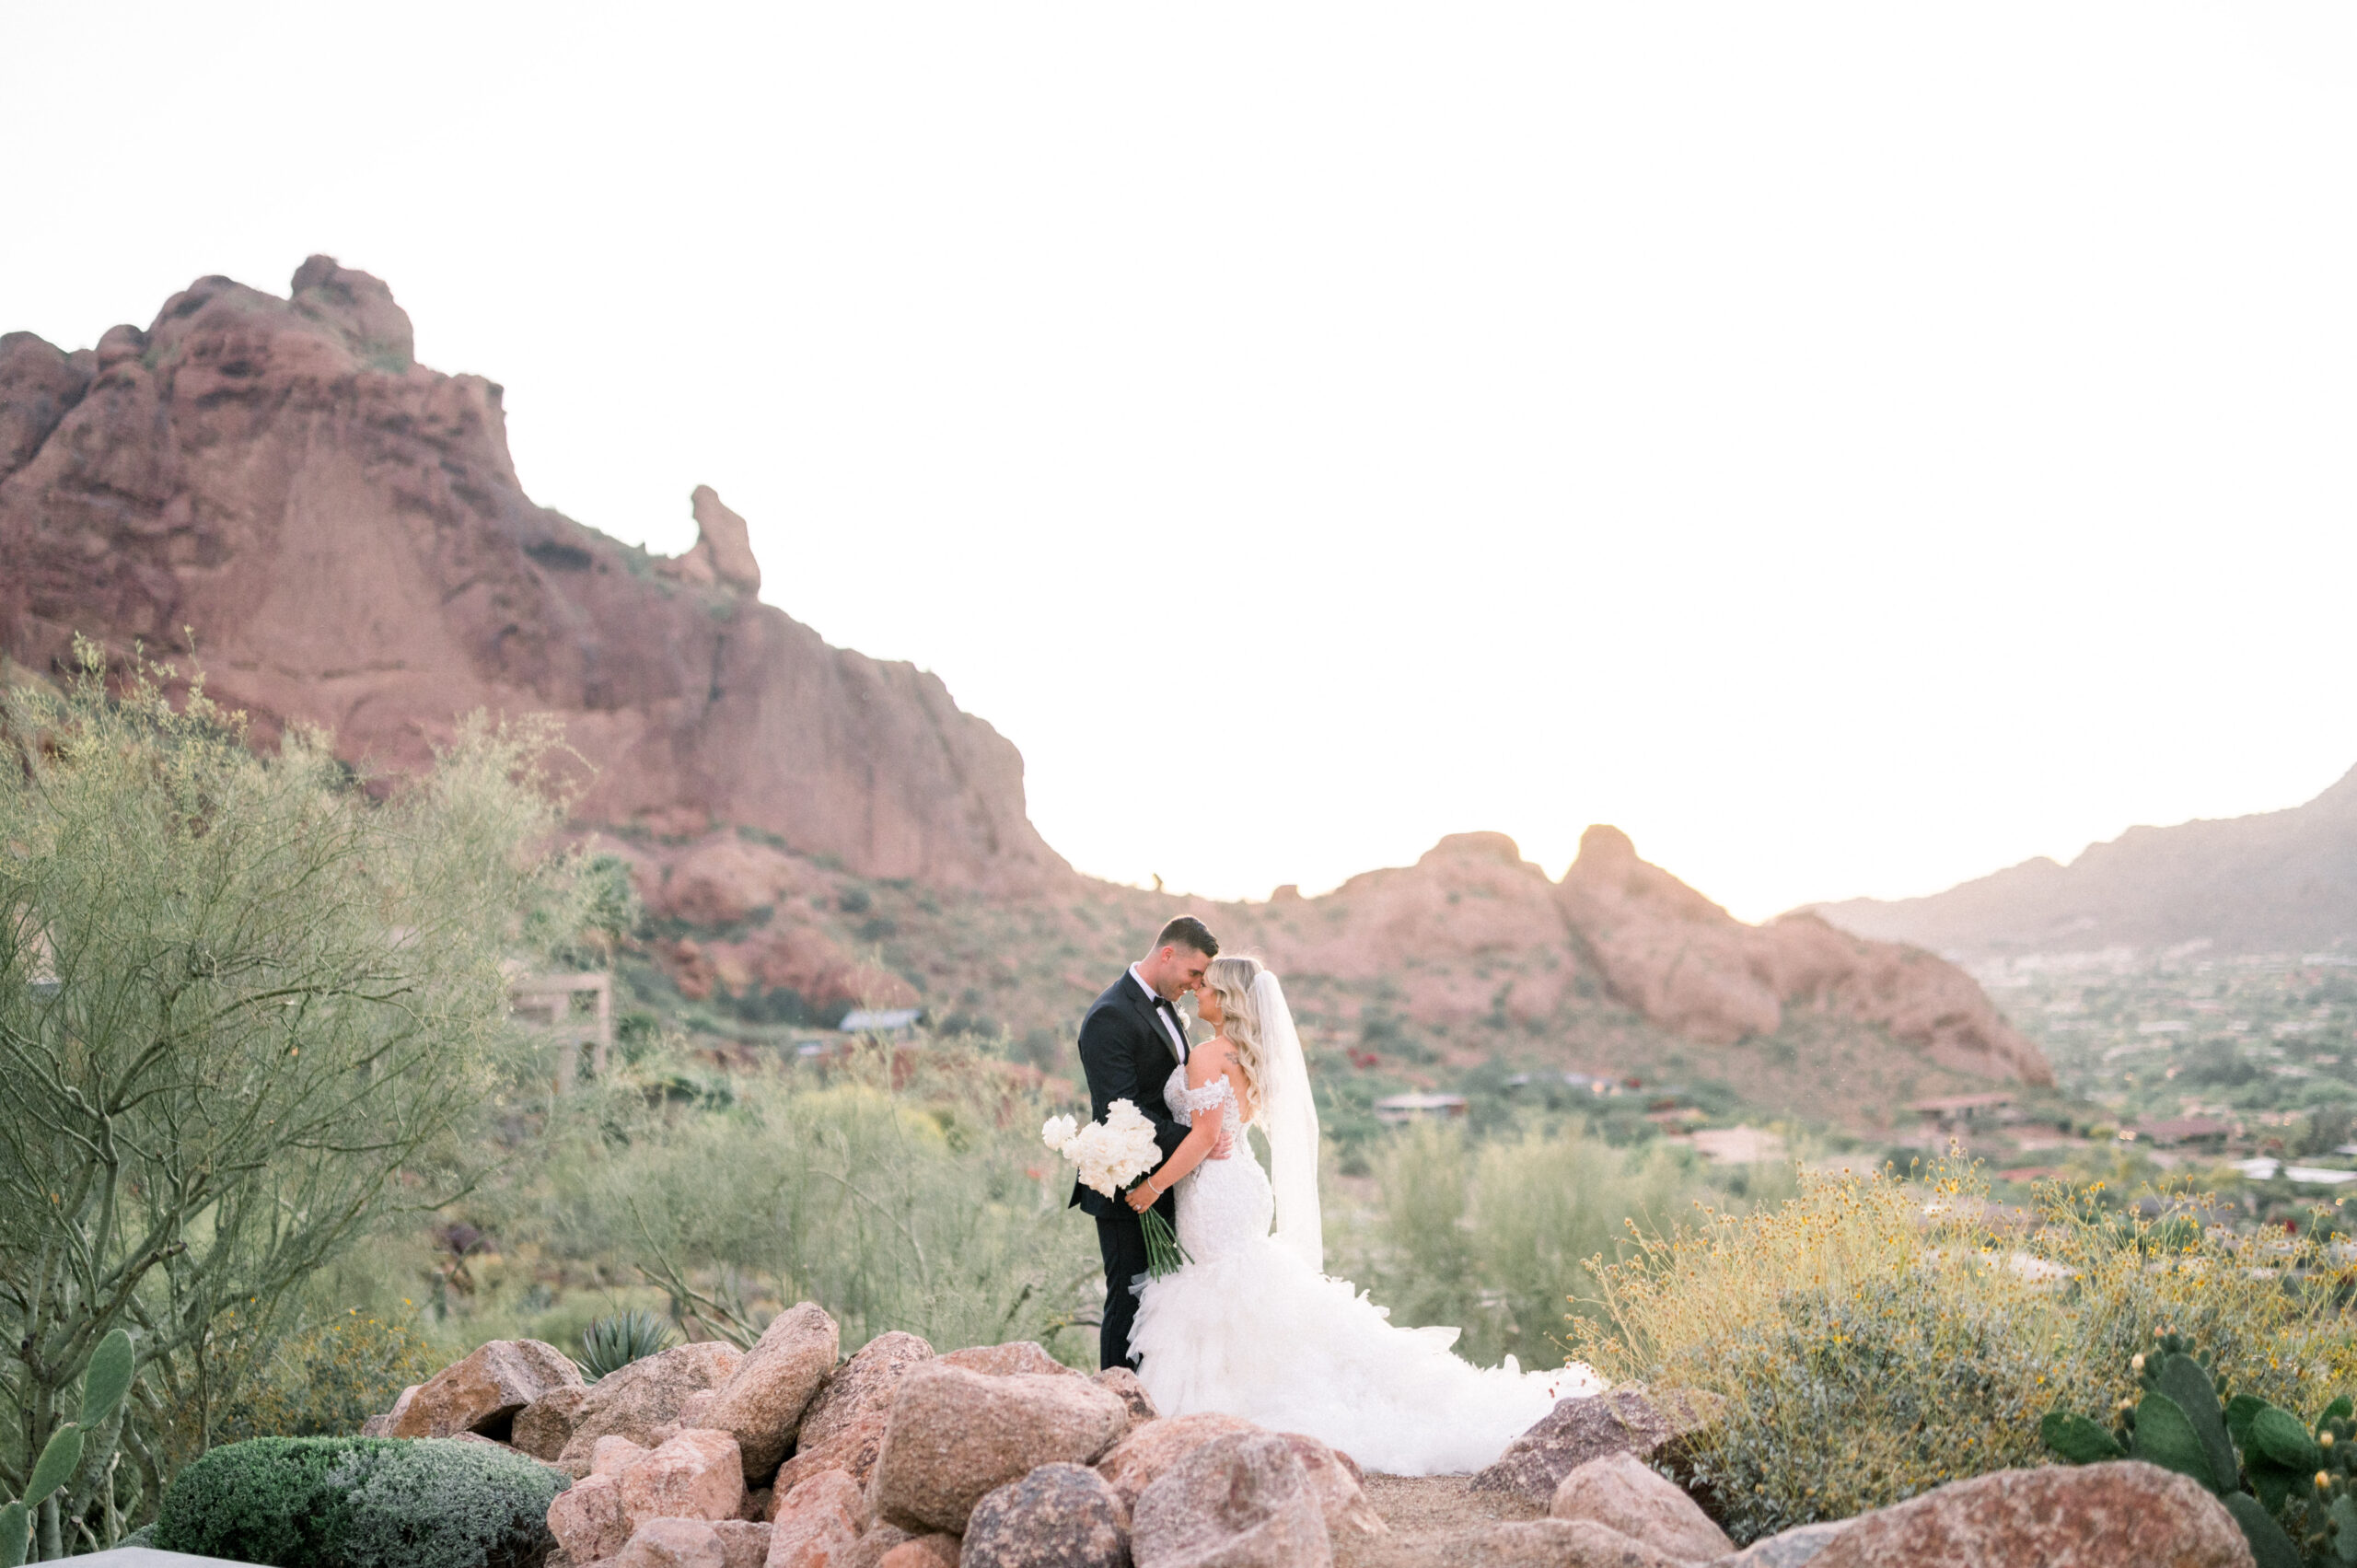 Sydney and Brandons Luxury Monochromatic Wedding at the beautiful Sanctuary at Camelback Mountain was one that dreams are made of!